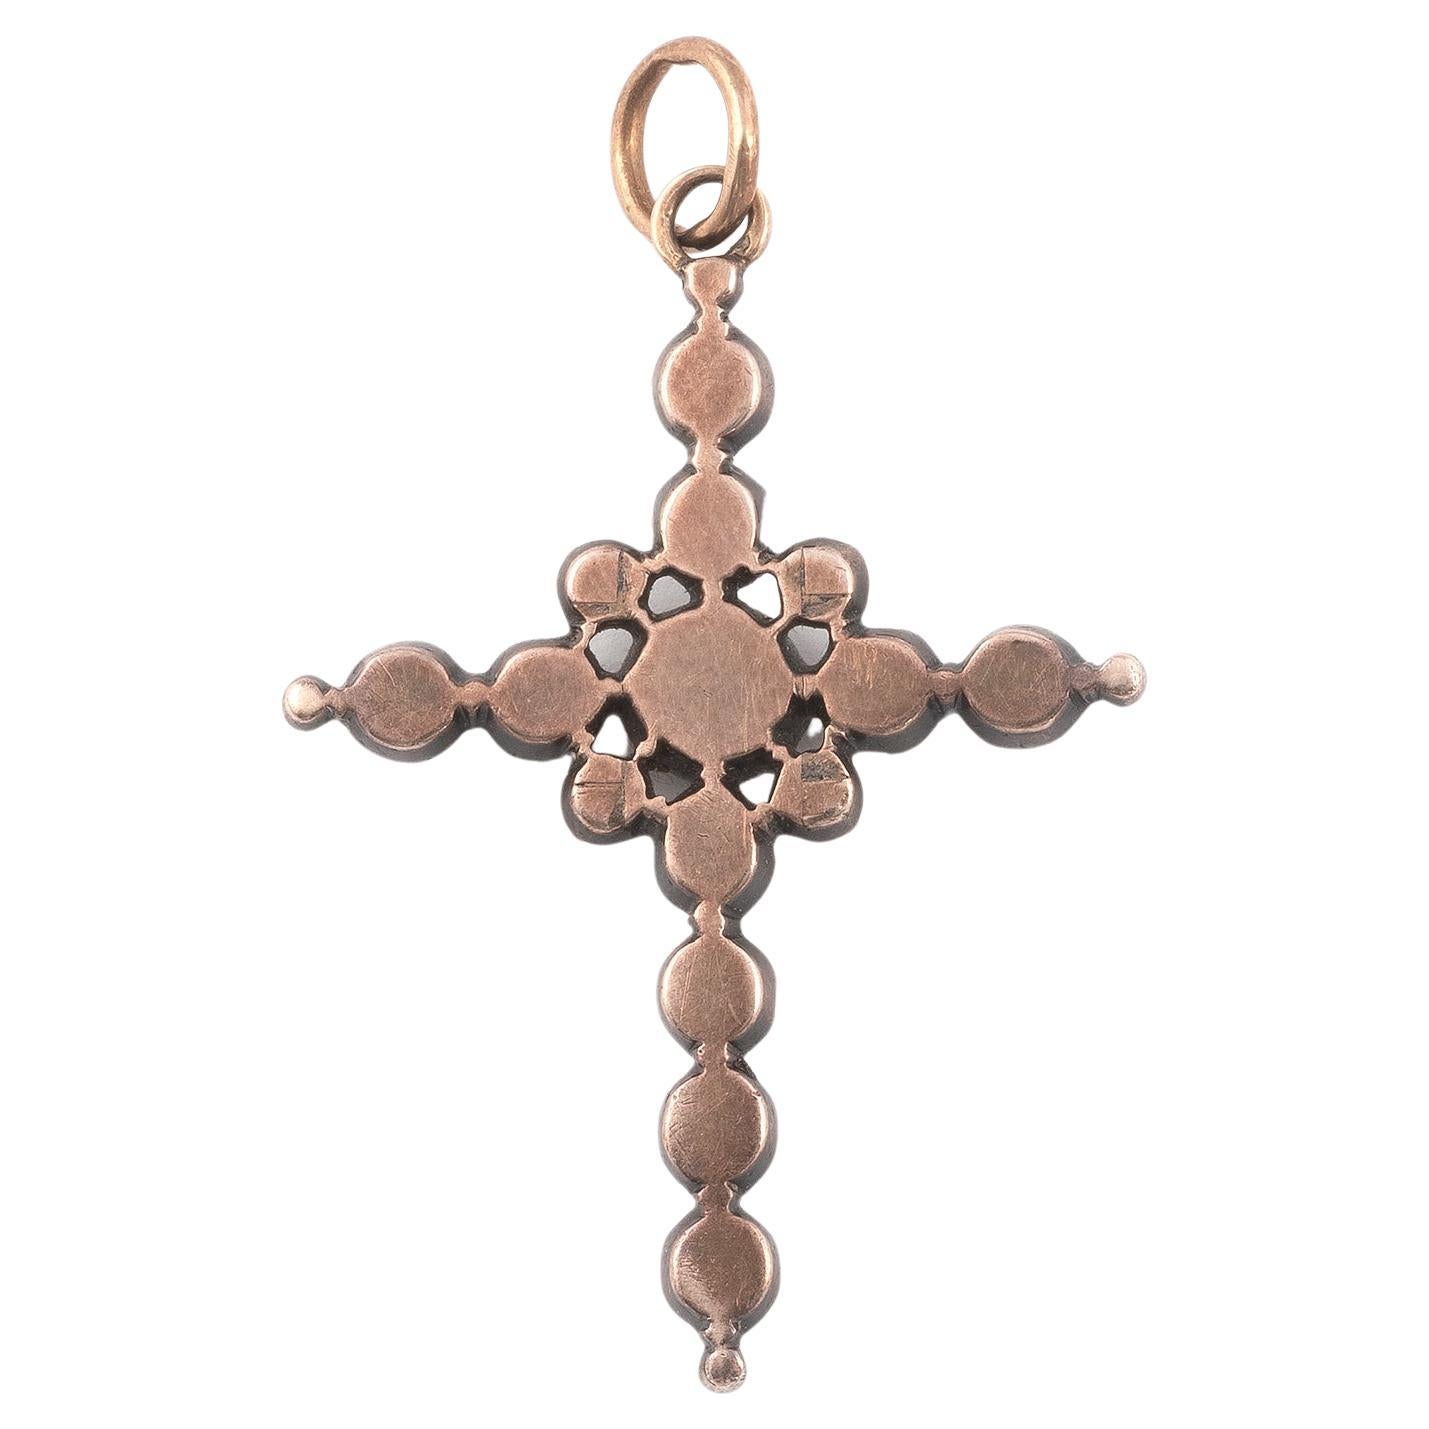 The Latin cross, set with rose-cut diamonds in raised closed-back settings.
Mounted in silver and gold, lengths: pendant 3.7cm